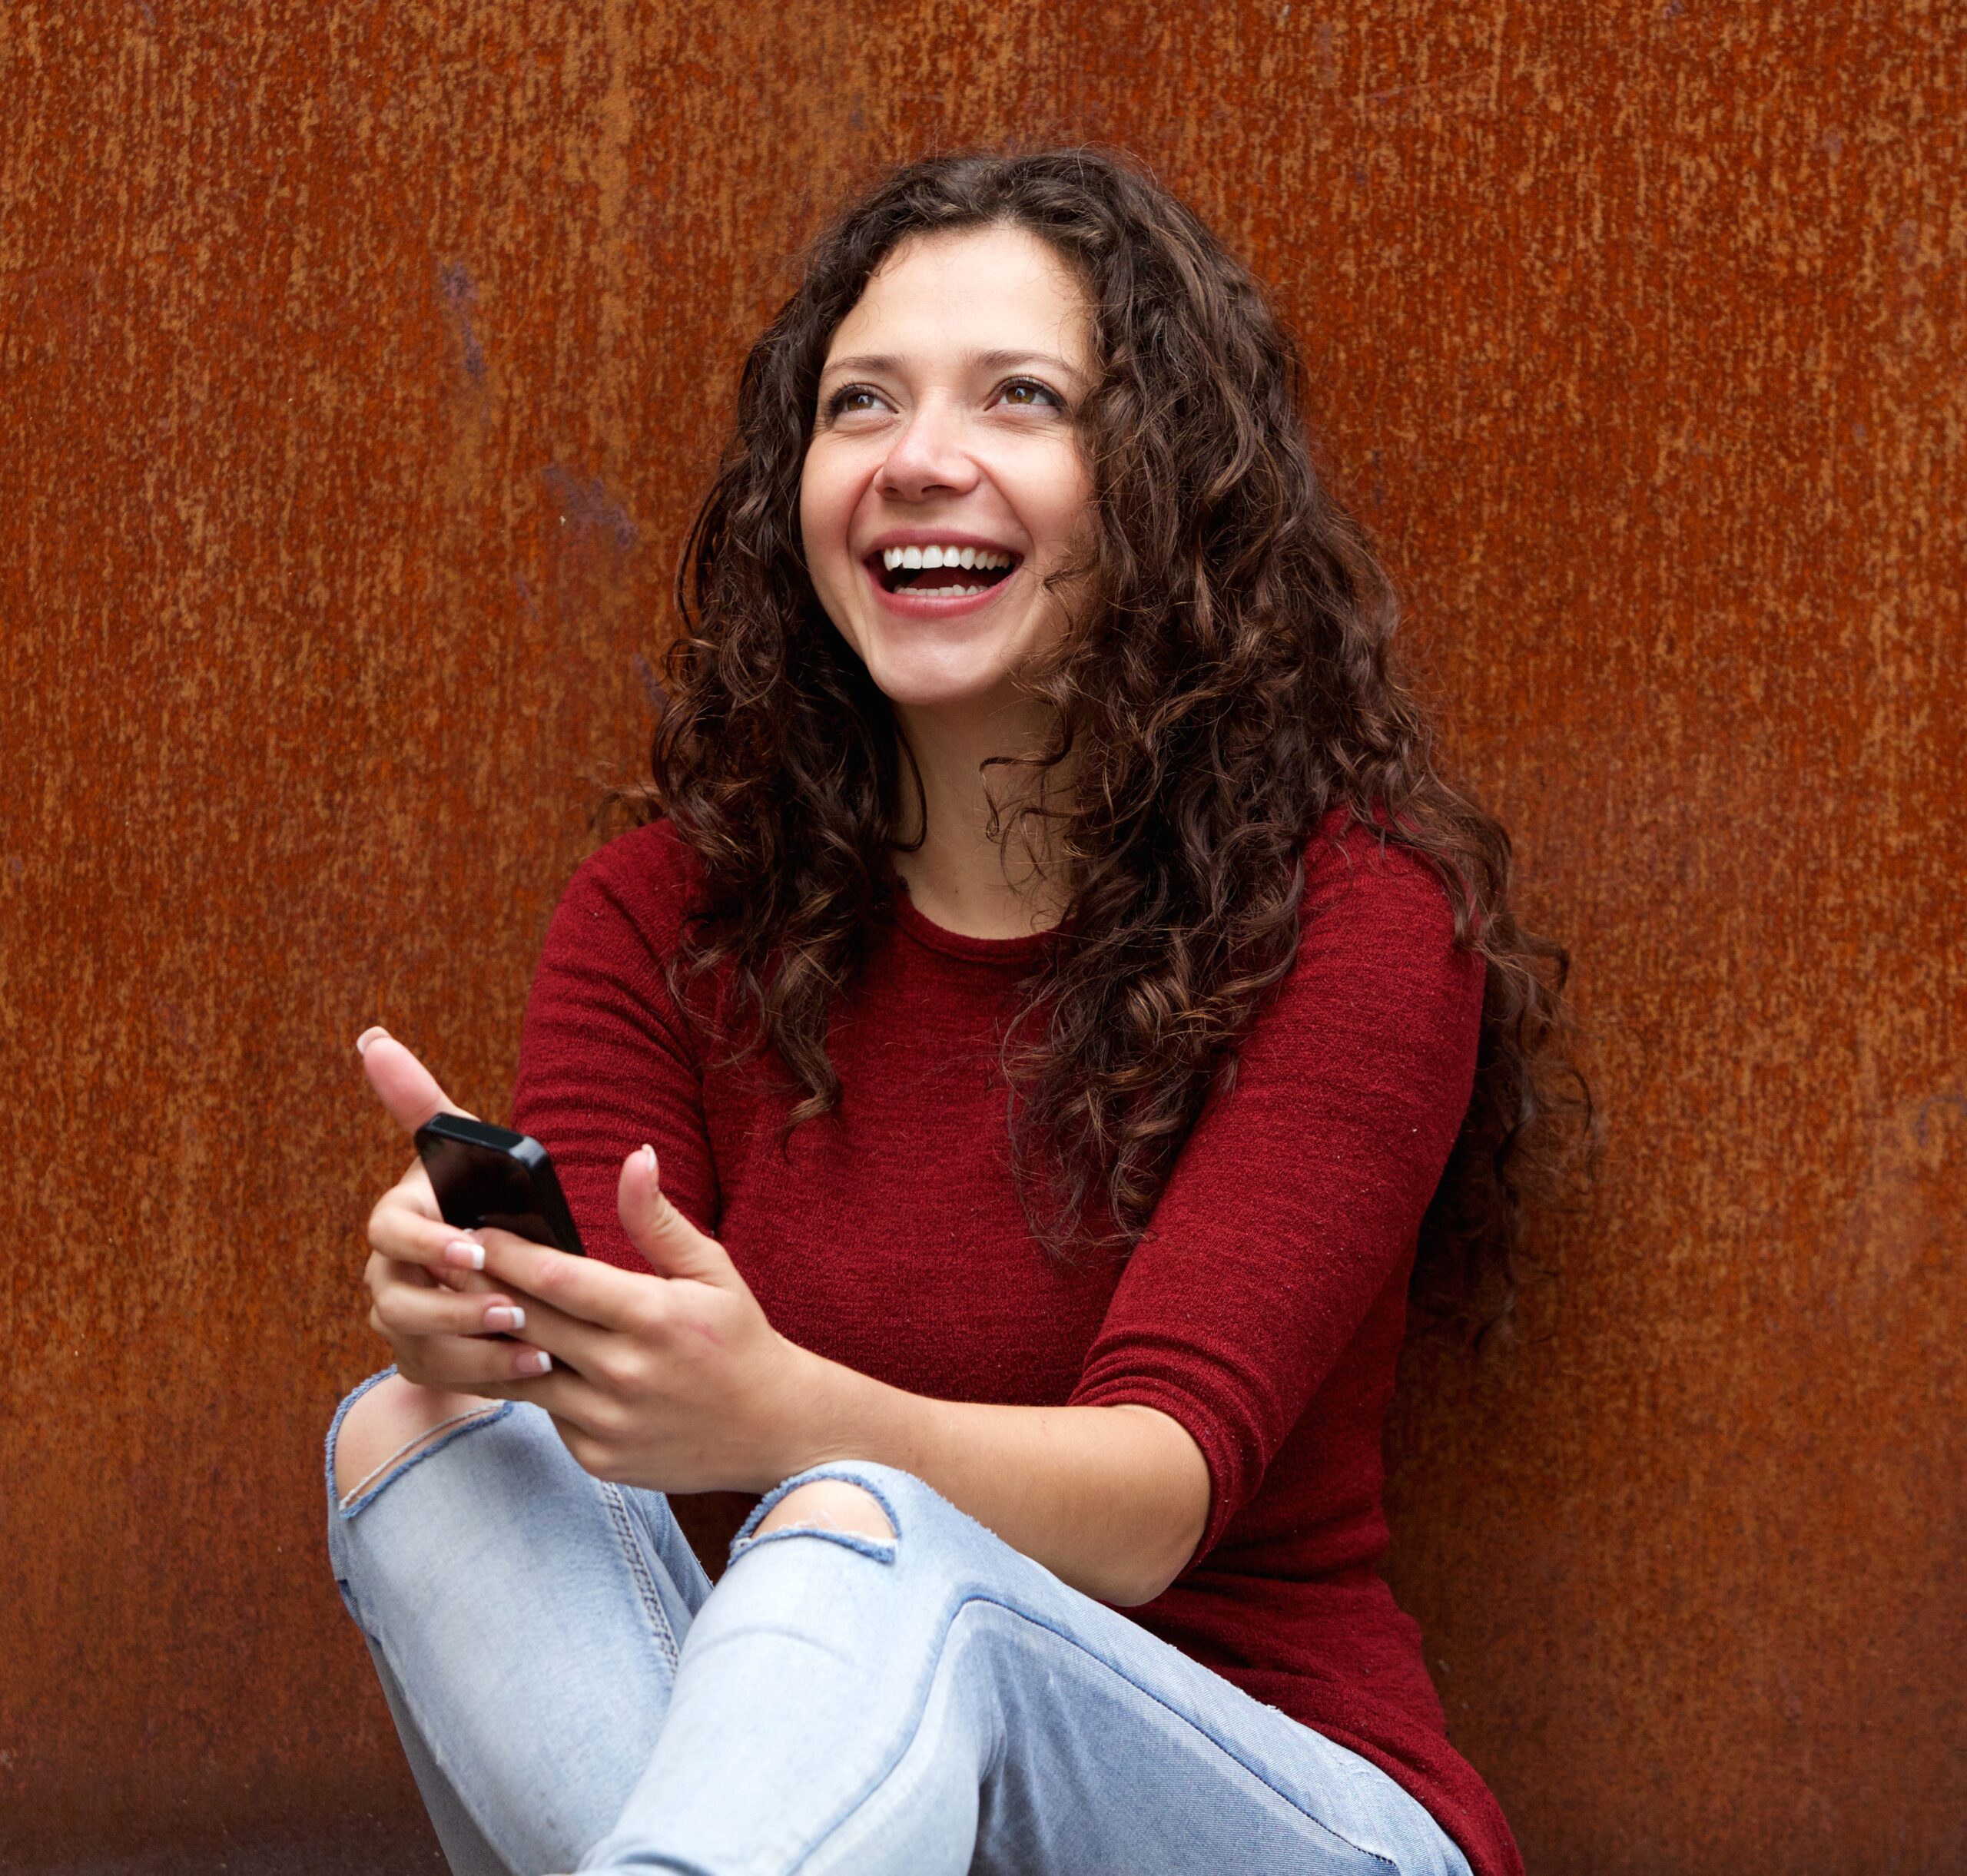 Portrait of smiling young woman sitting against brown wall with mobile phone